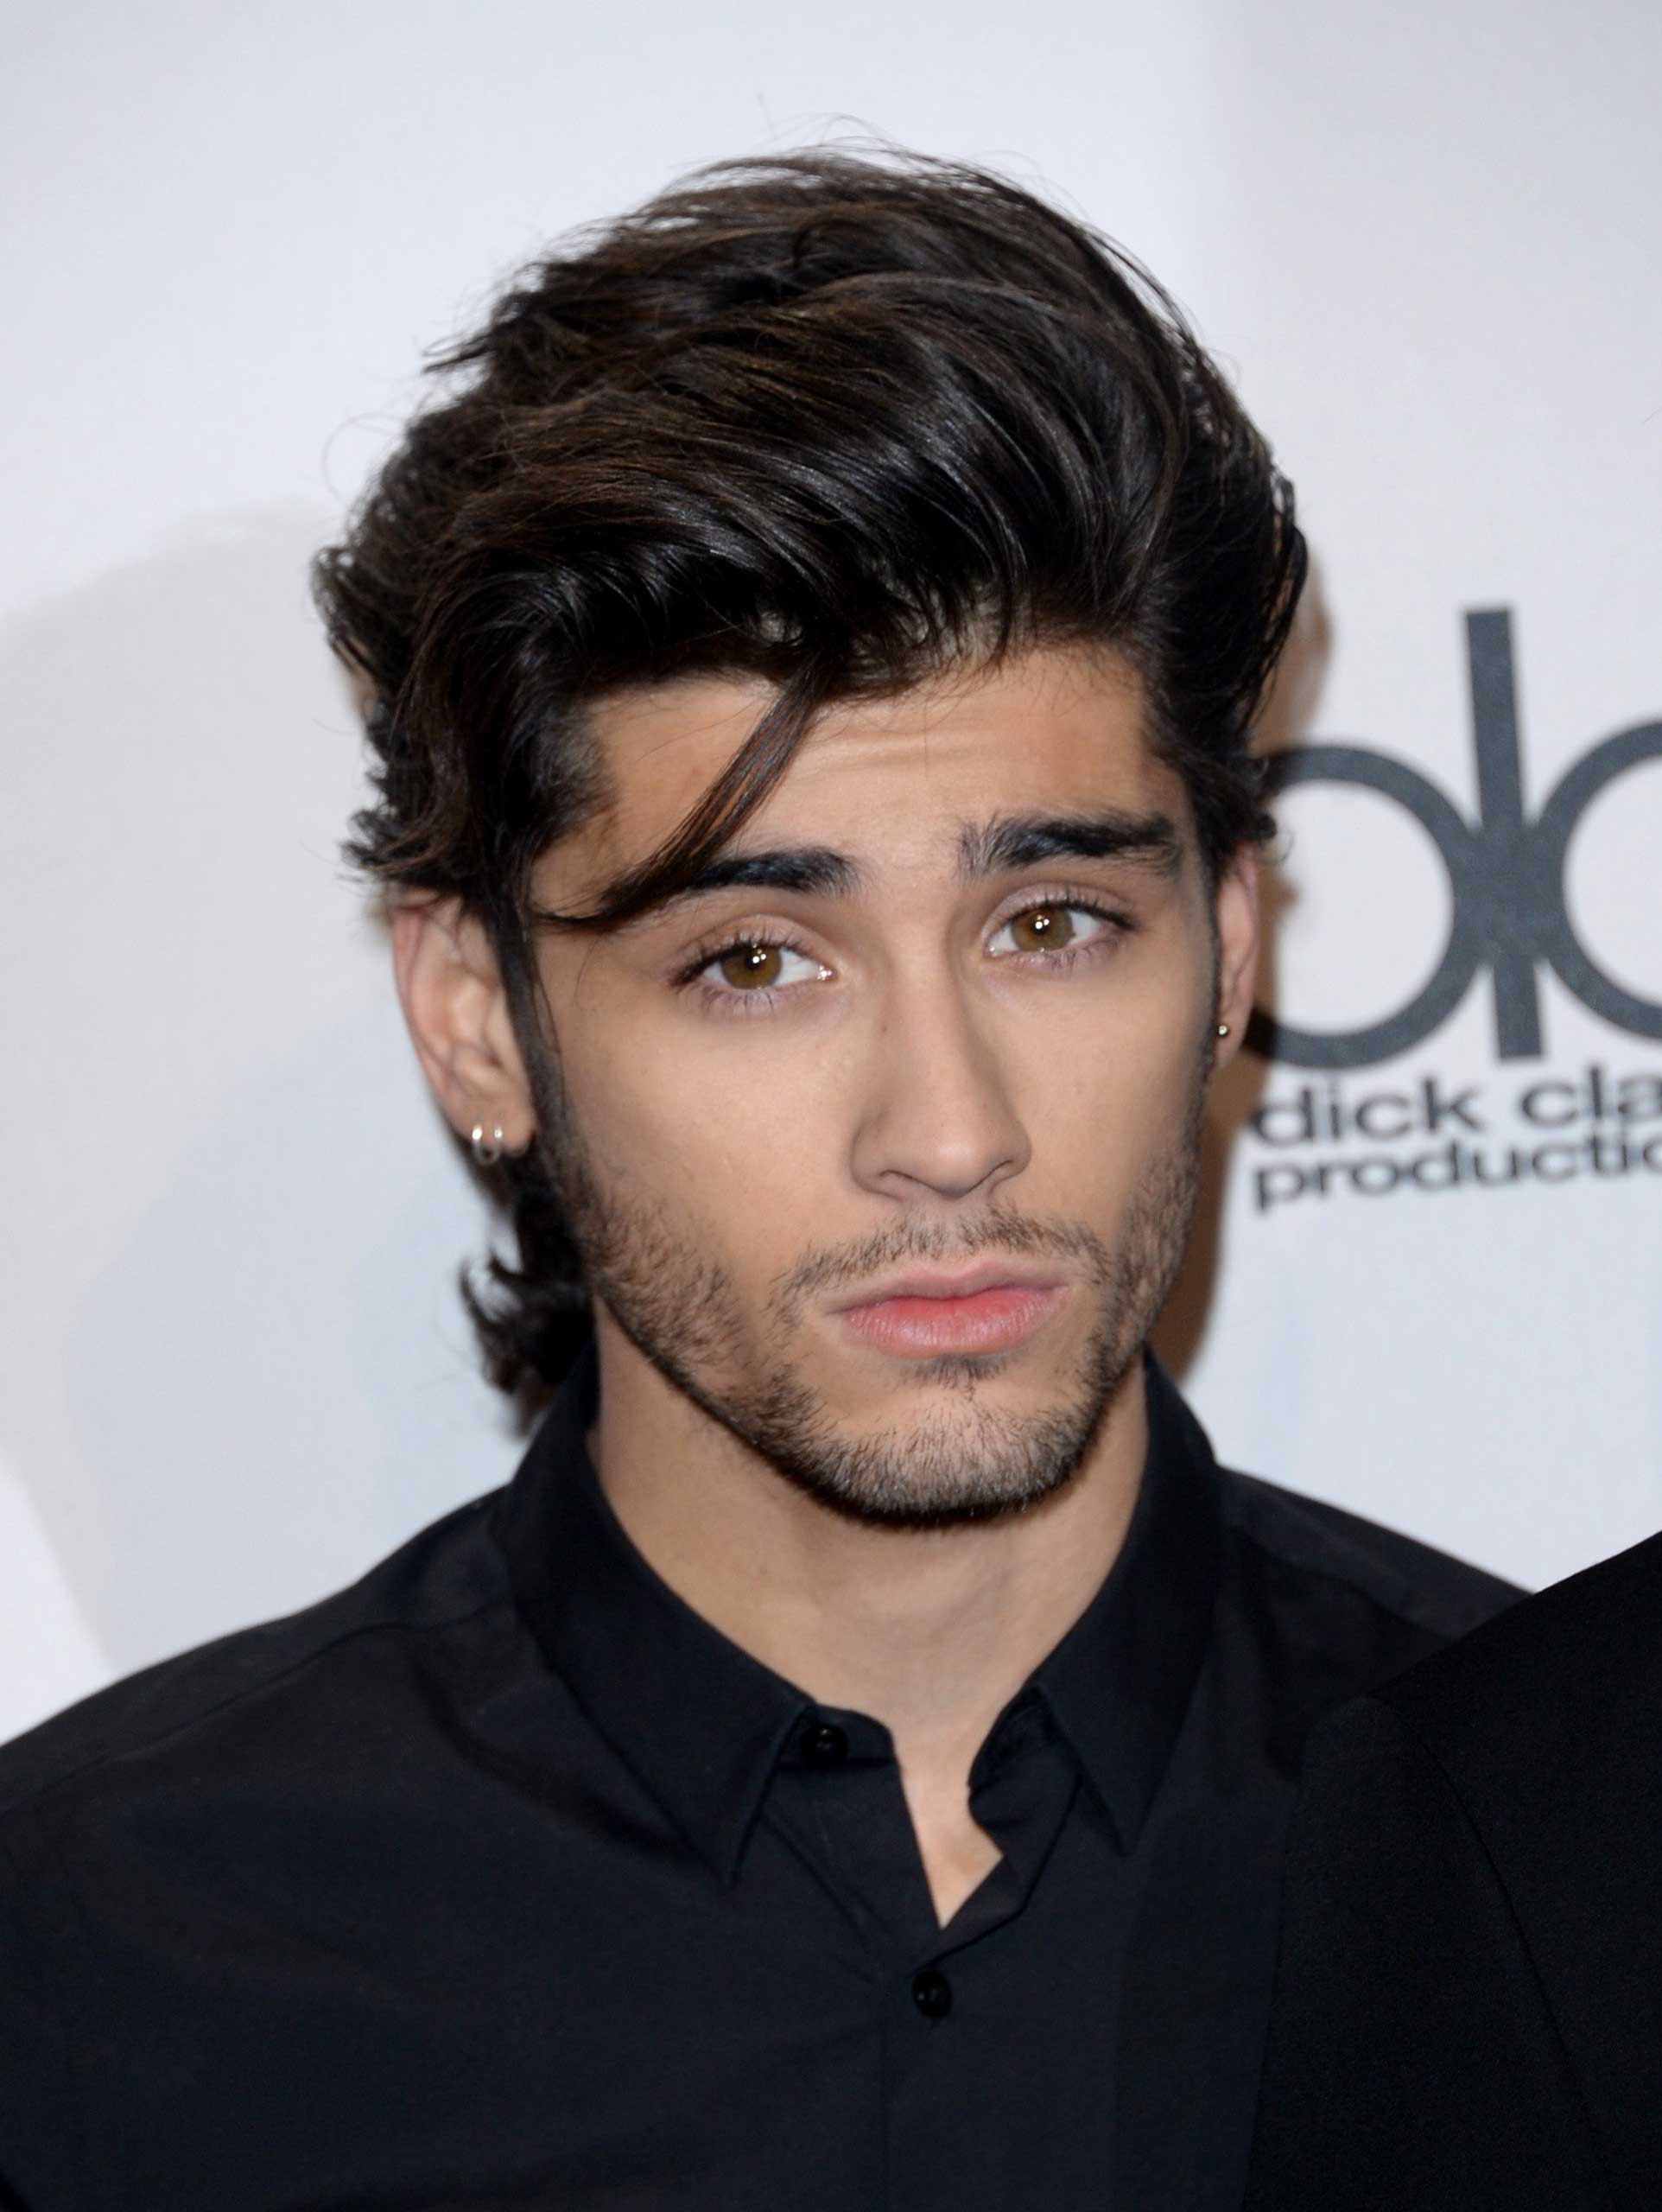 Singer Zayn Malik of One Direction at the 2014 American Music Awards at Nokia Theatre in Los Angeles on Nov. 23, 2014.